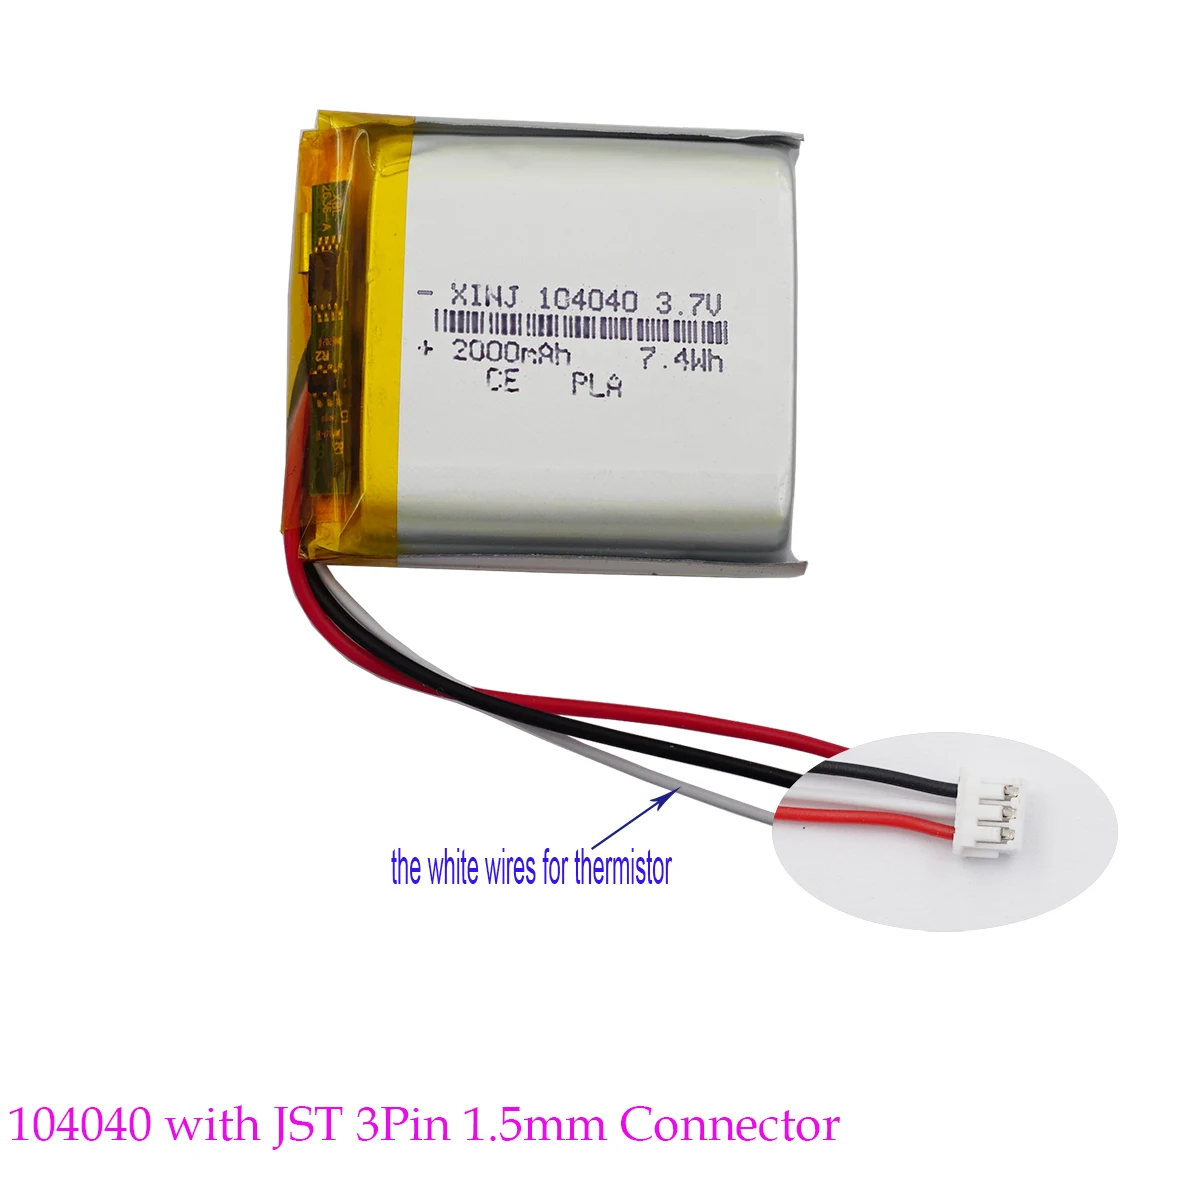 

3.7V 2000mAh 7.4Wh Li-Polymer Li Lipo Battery NTC Thermistor 3 Wires 3Pin 1.5mm JST Connector 104040 For GPS DashCam Tablet PC